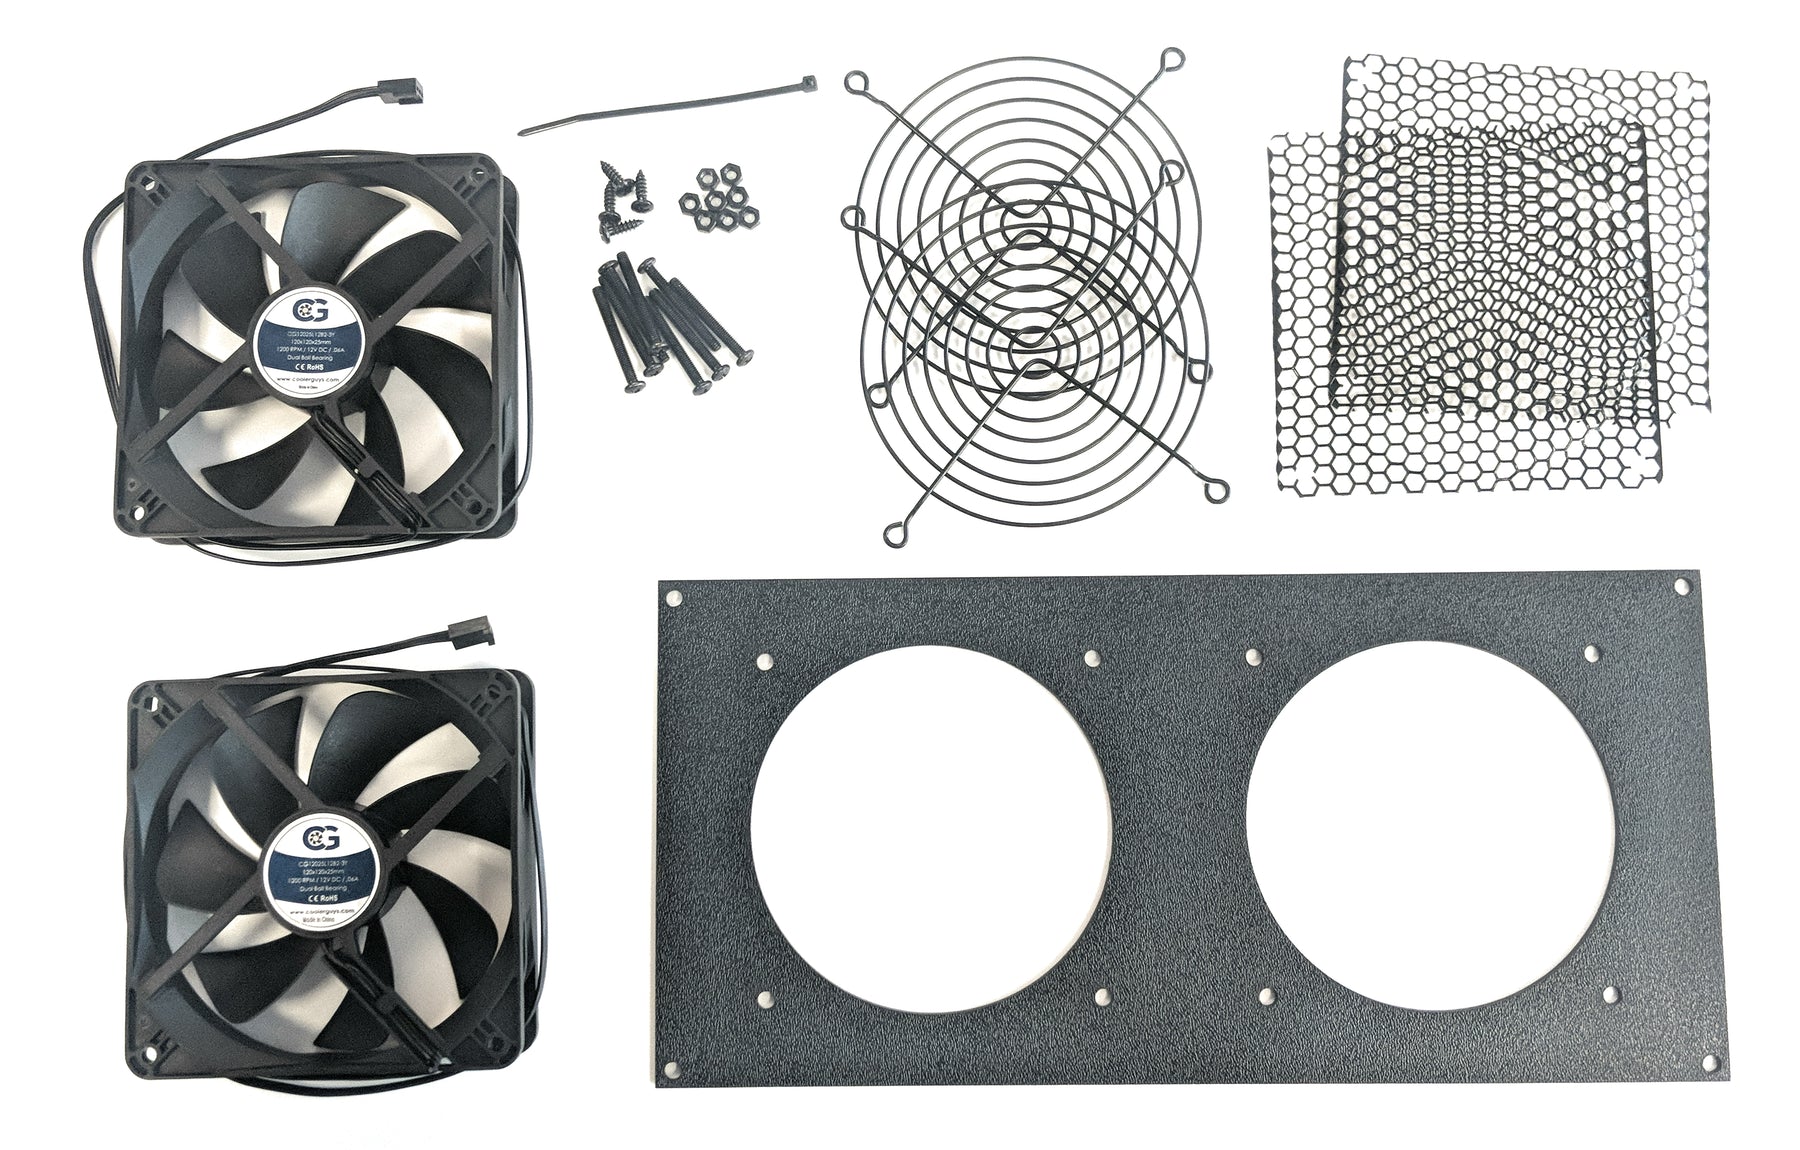 Dual 120mm Kit with Fan - Coolerguys